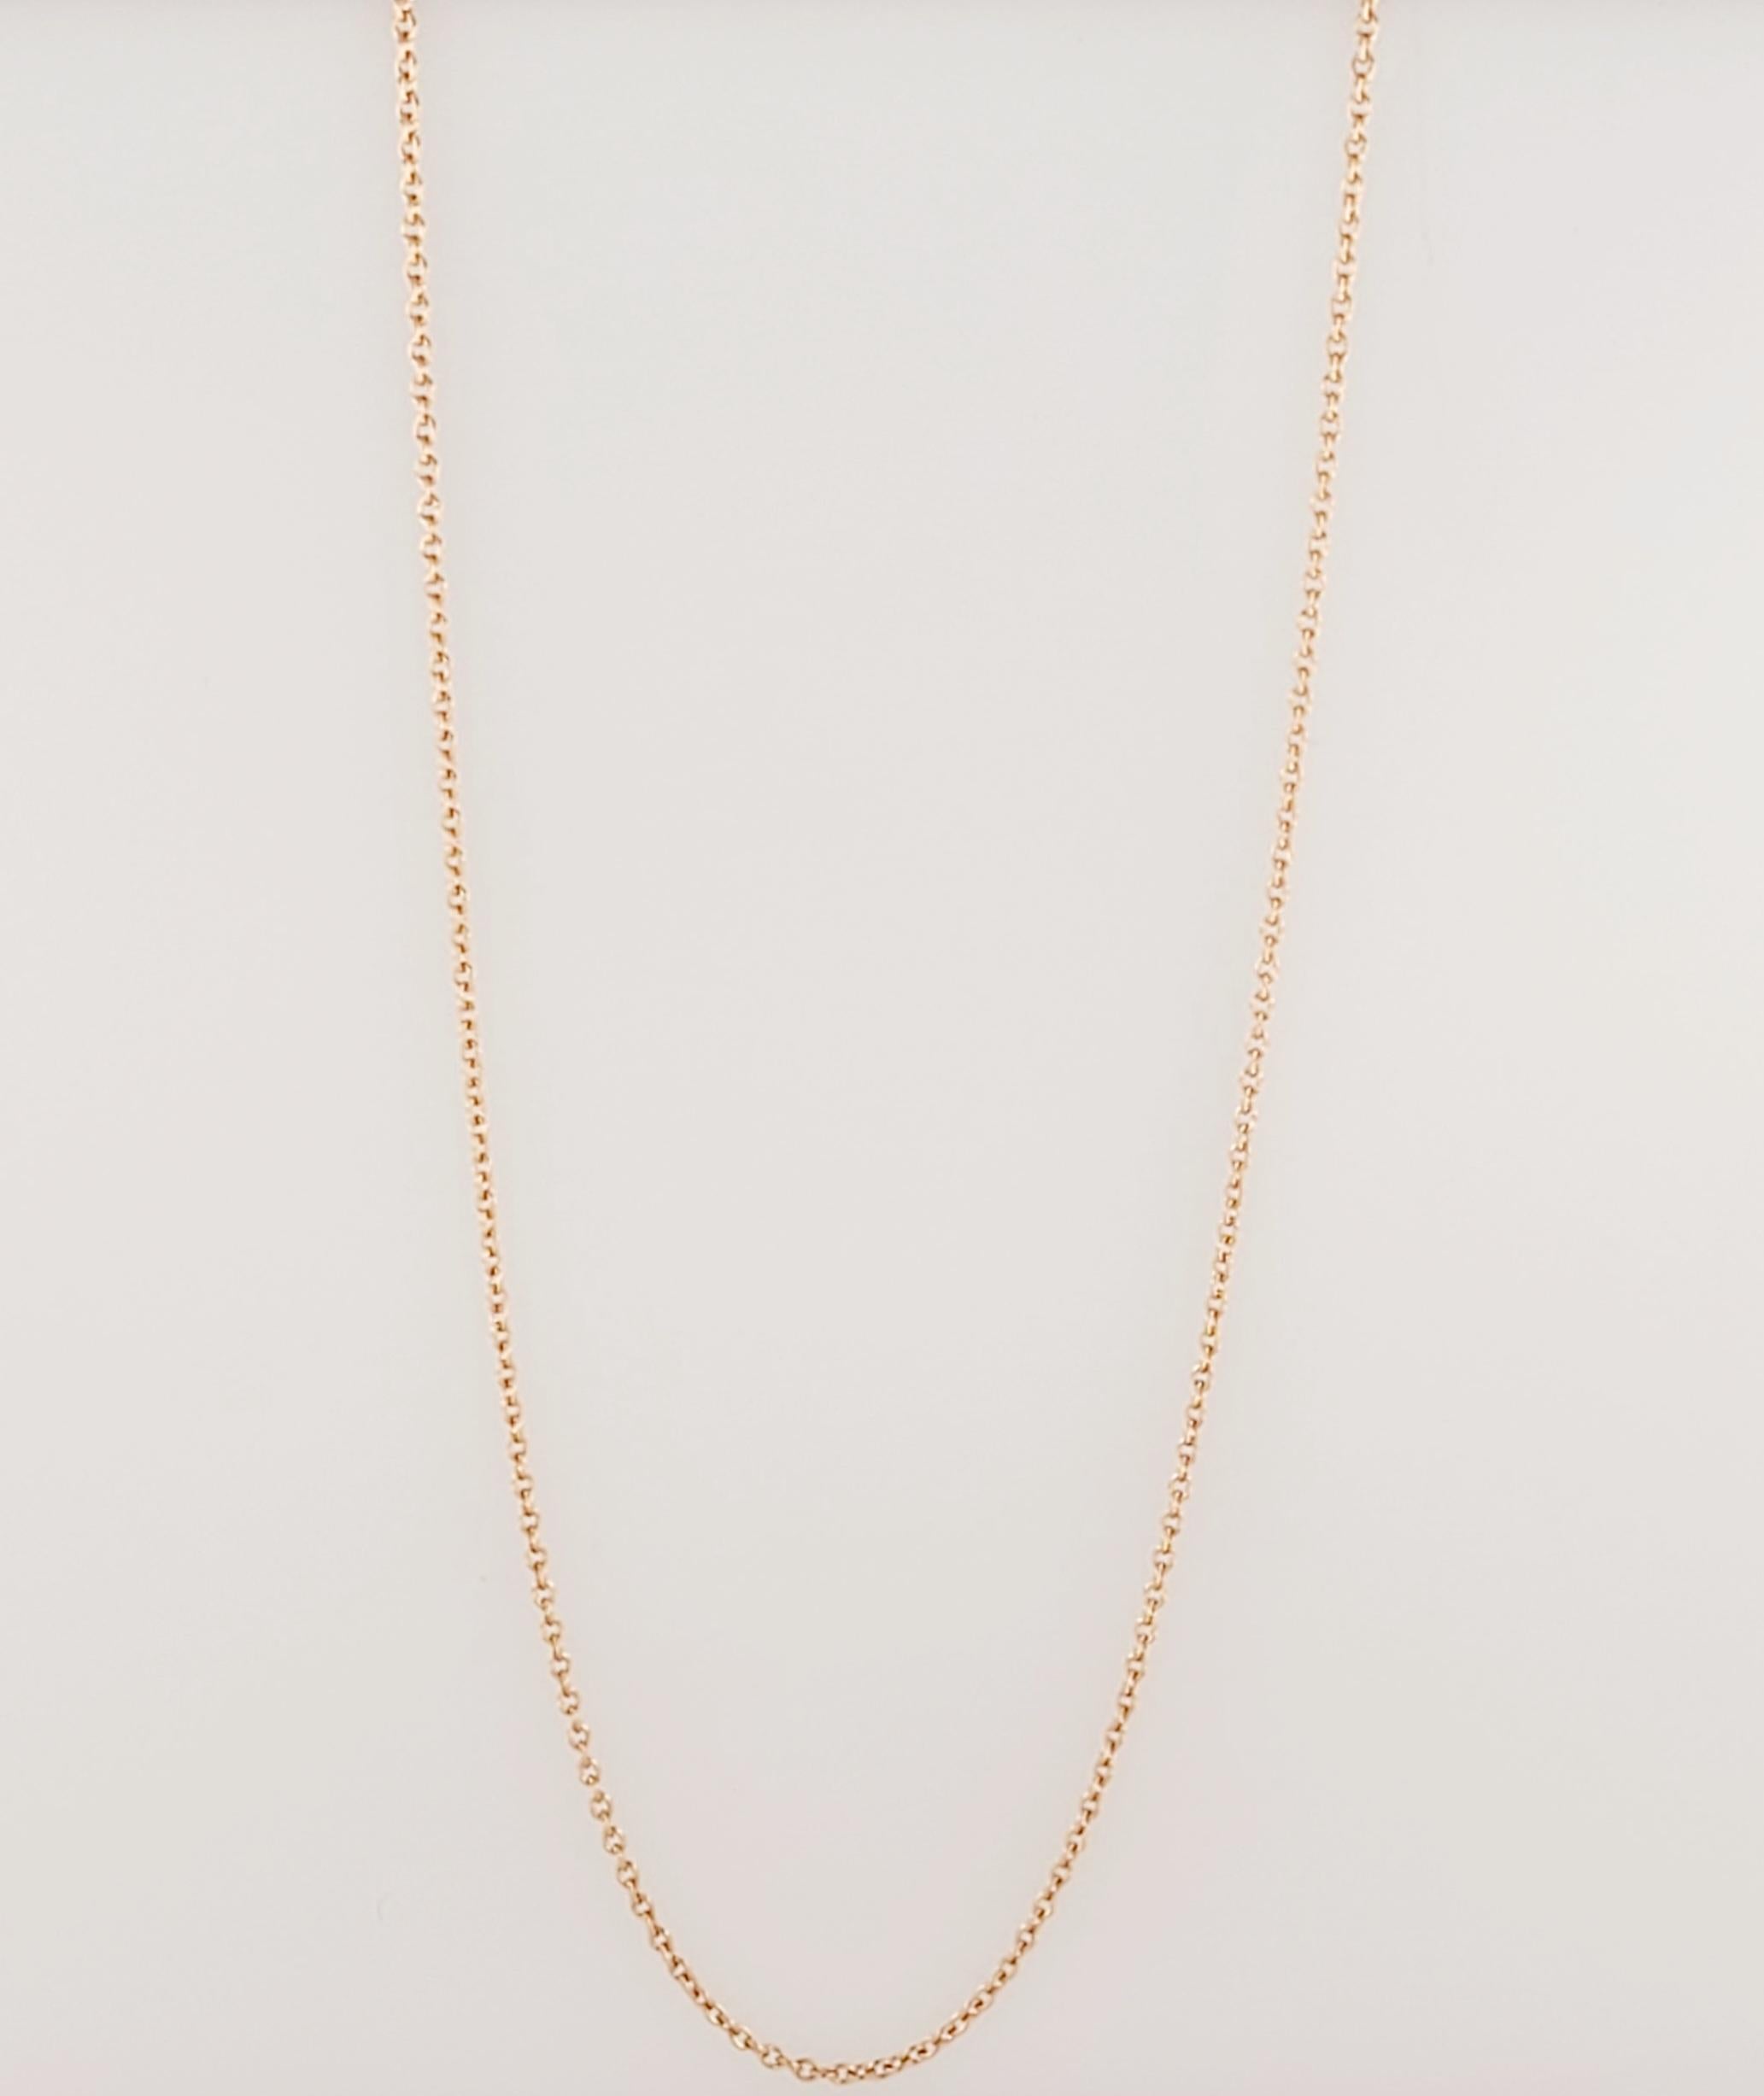 Paloma Picasso Tiffany & Co Chain 18K Rose Gold 16'' Long In New Condition For Sale In New York, NY